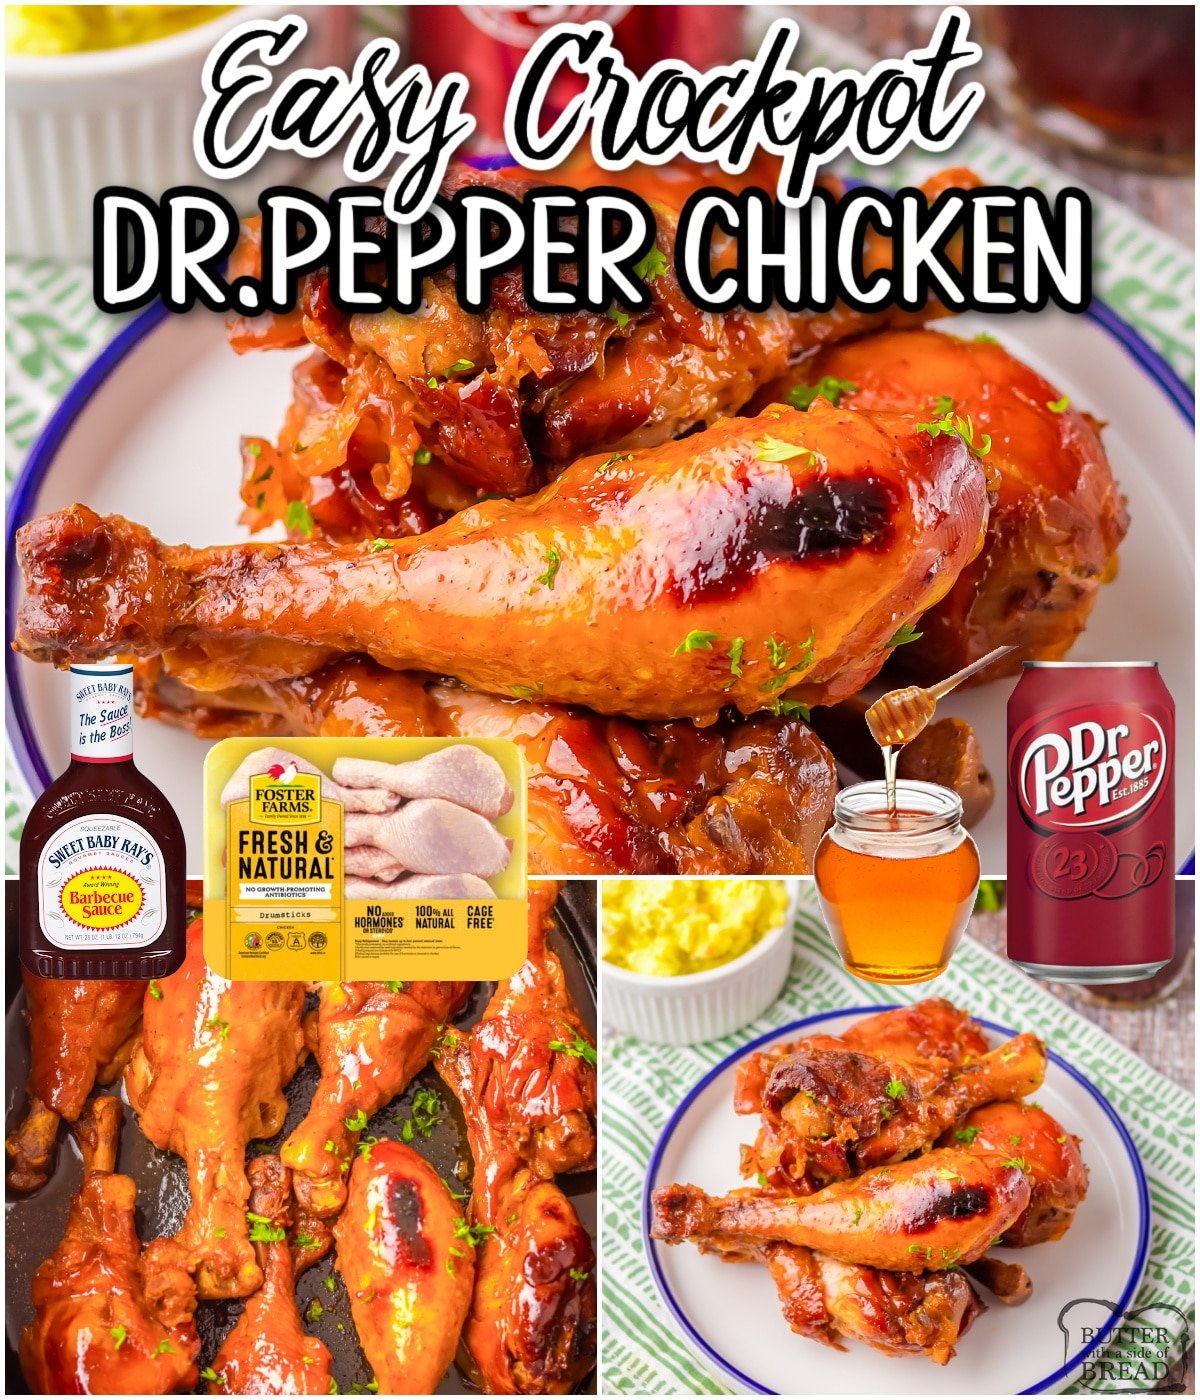 Crockpot Dr. Pepper Chicken Legs are tender, fall-off-the bone chicken drumsticks that slow cook in a Dr. Pepper BBQ sauce everyone loves!